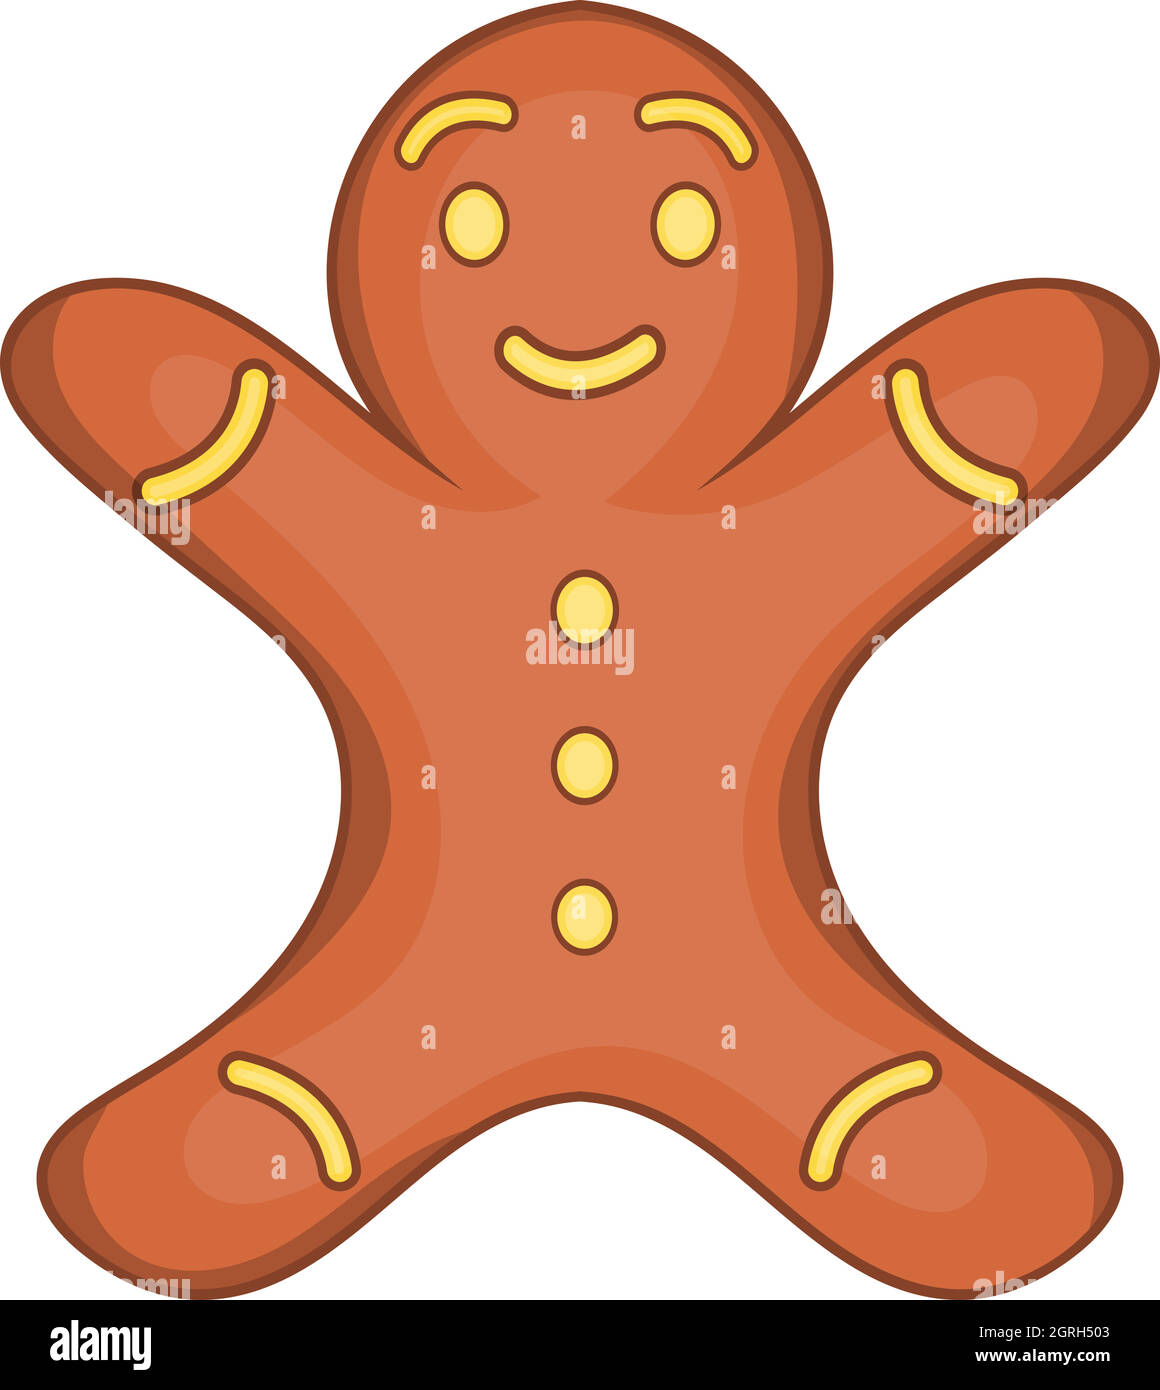 Gingerbread man cookie icon, cartoon style Stock Vector